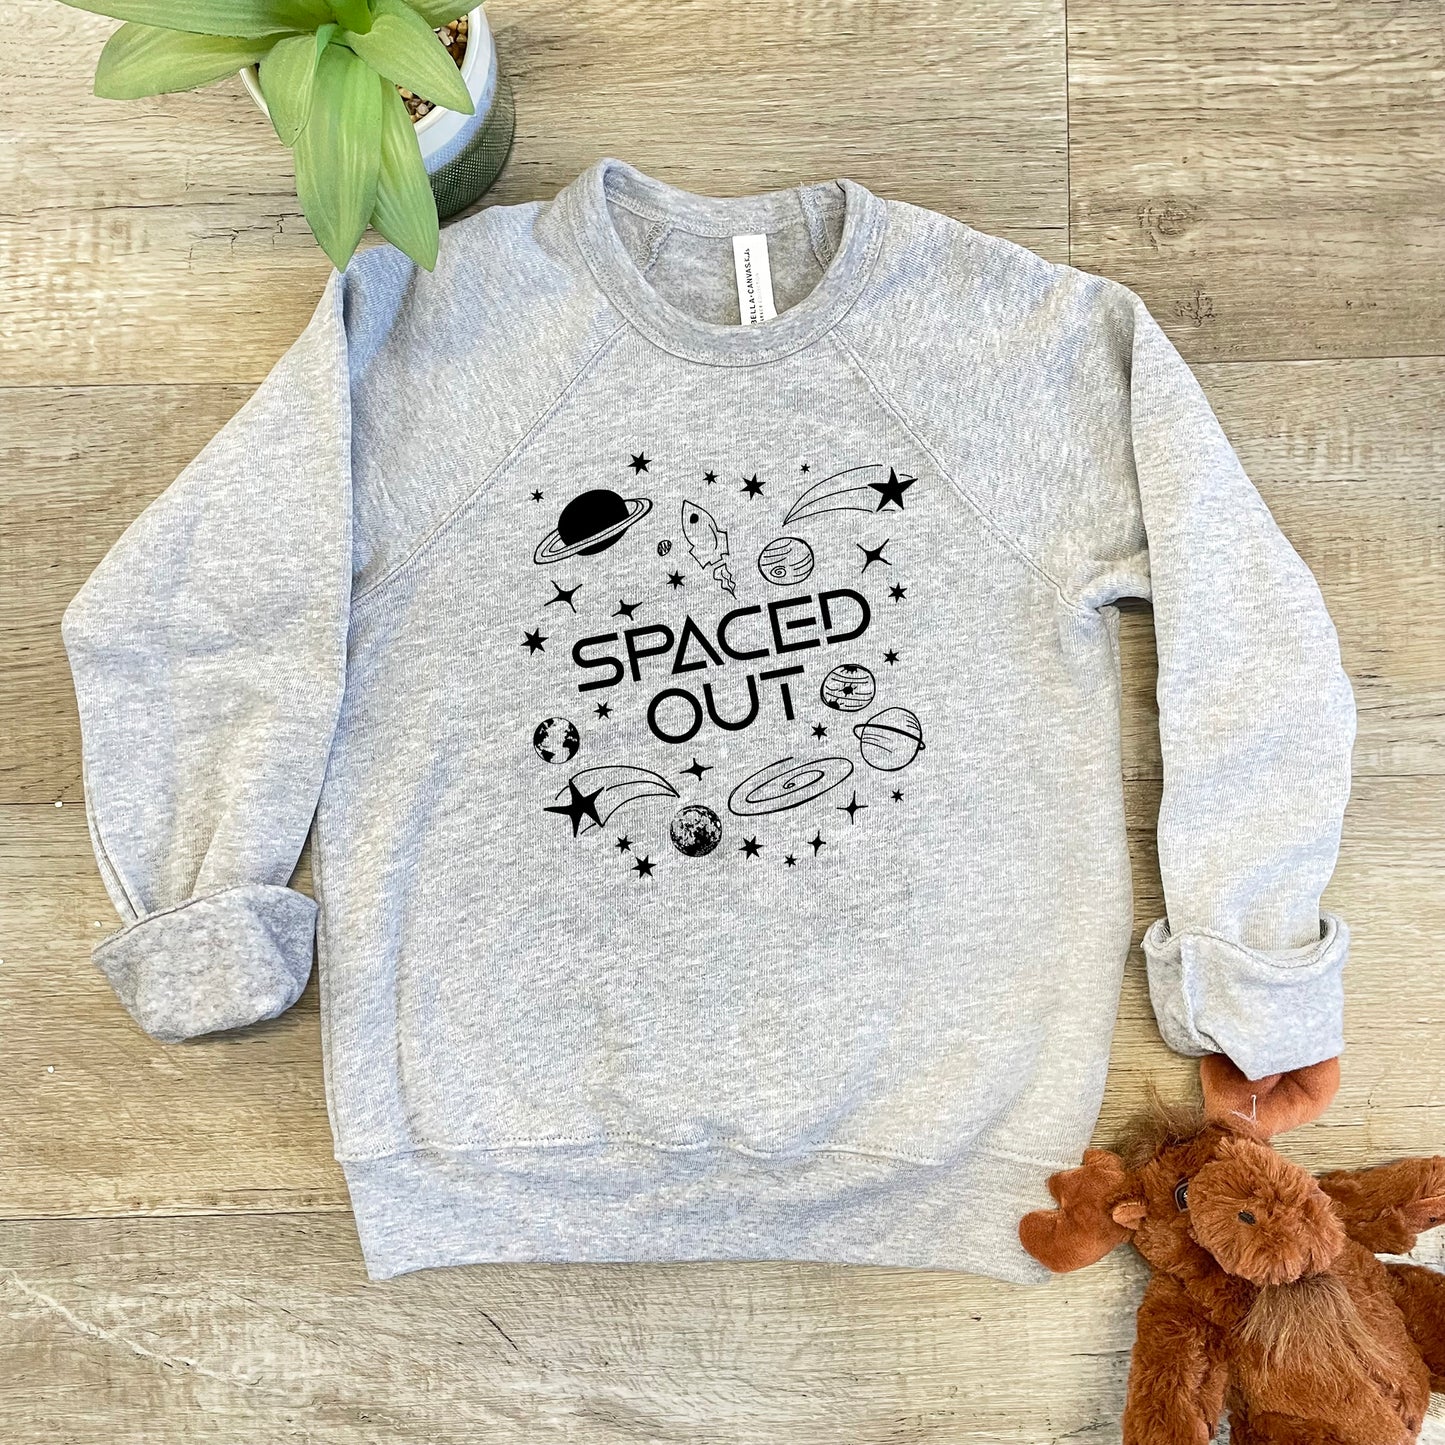 Spaced Out - Kid's Sweatshirt - Heather Gray or Mauve